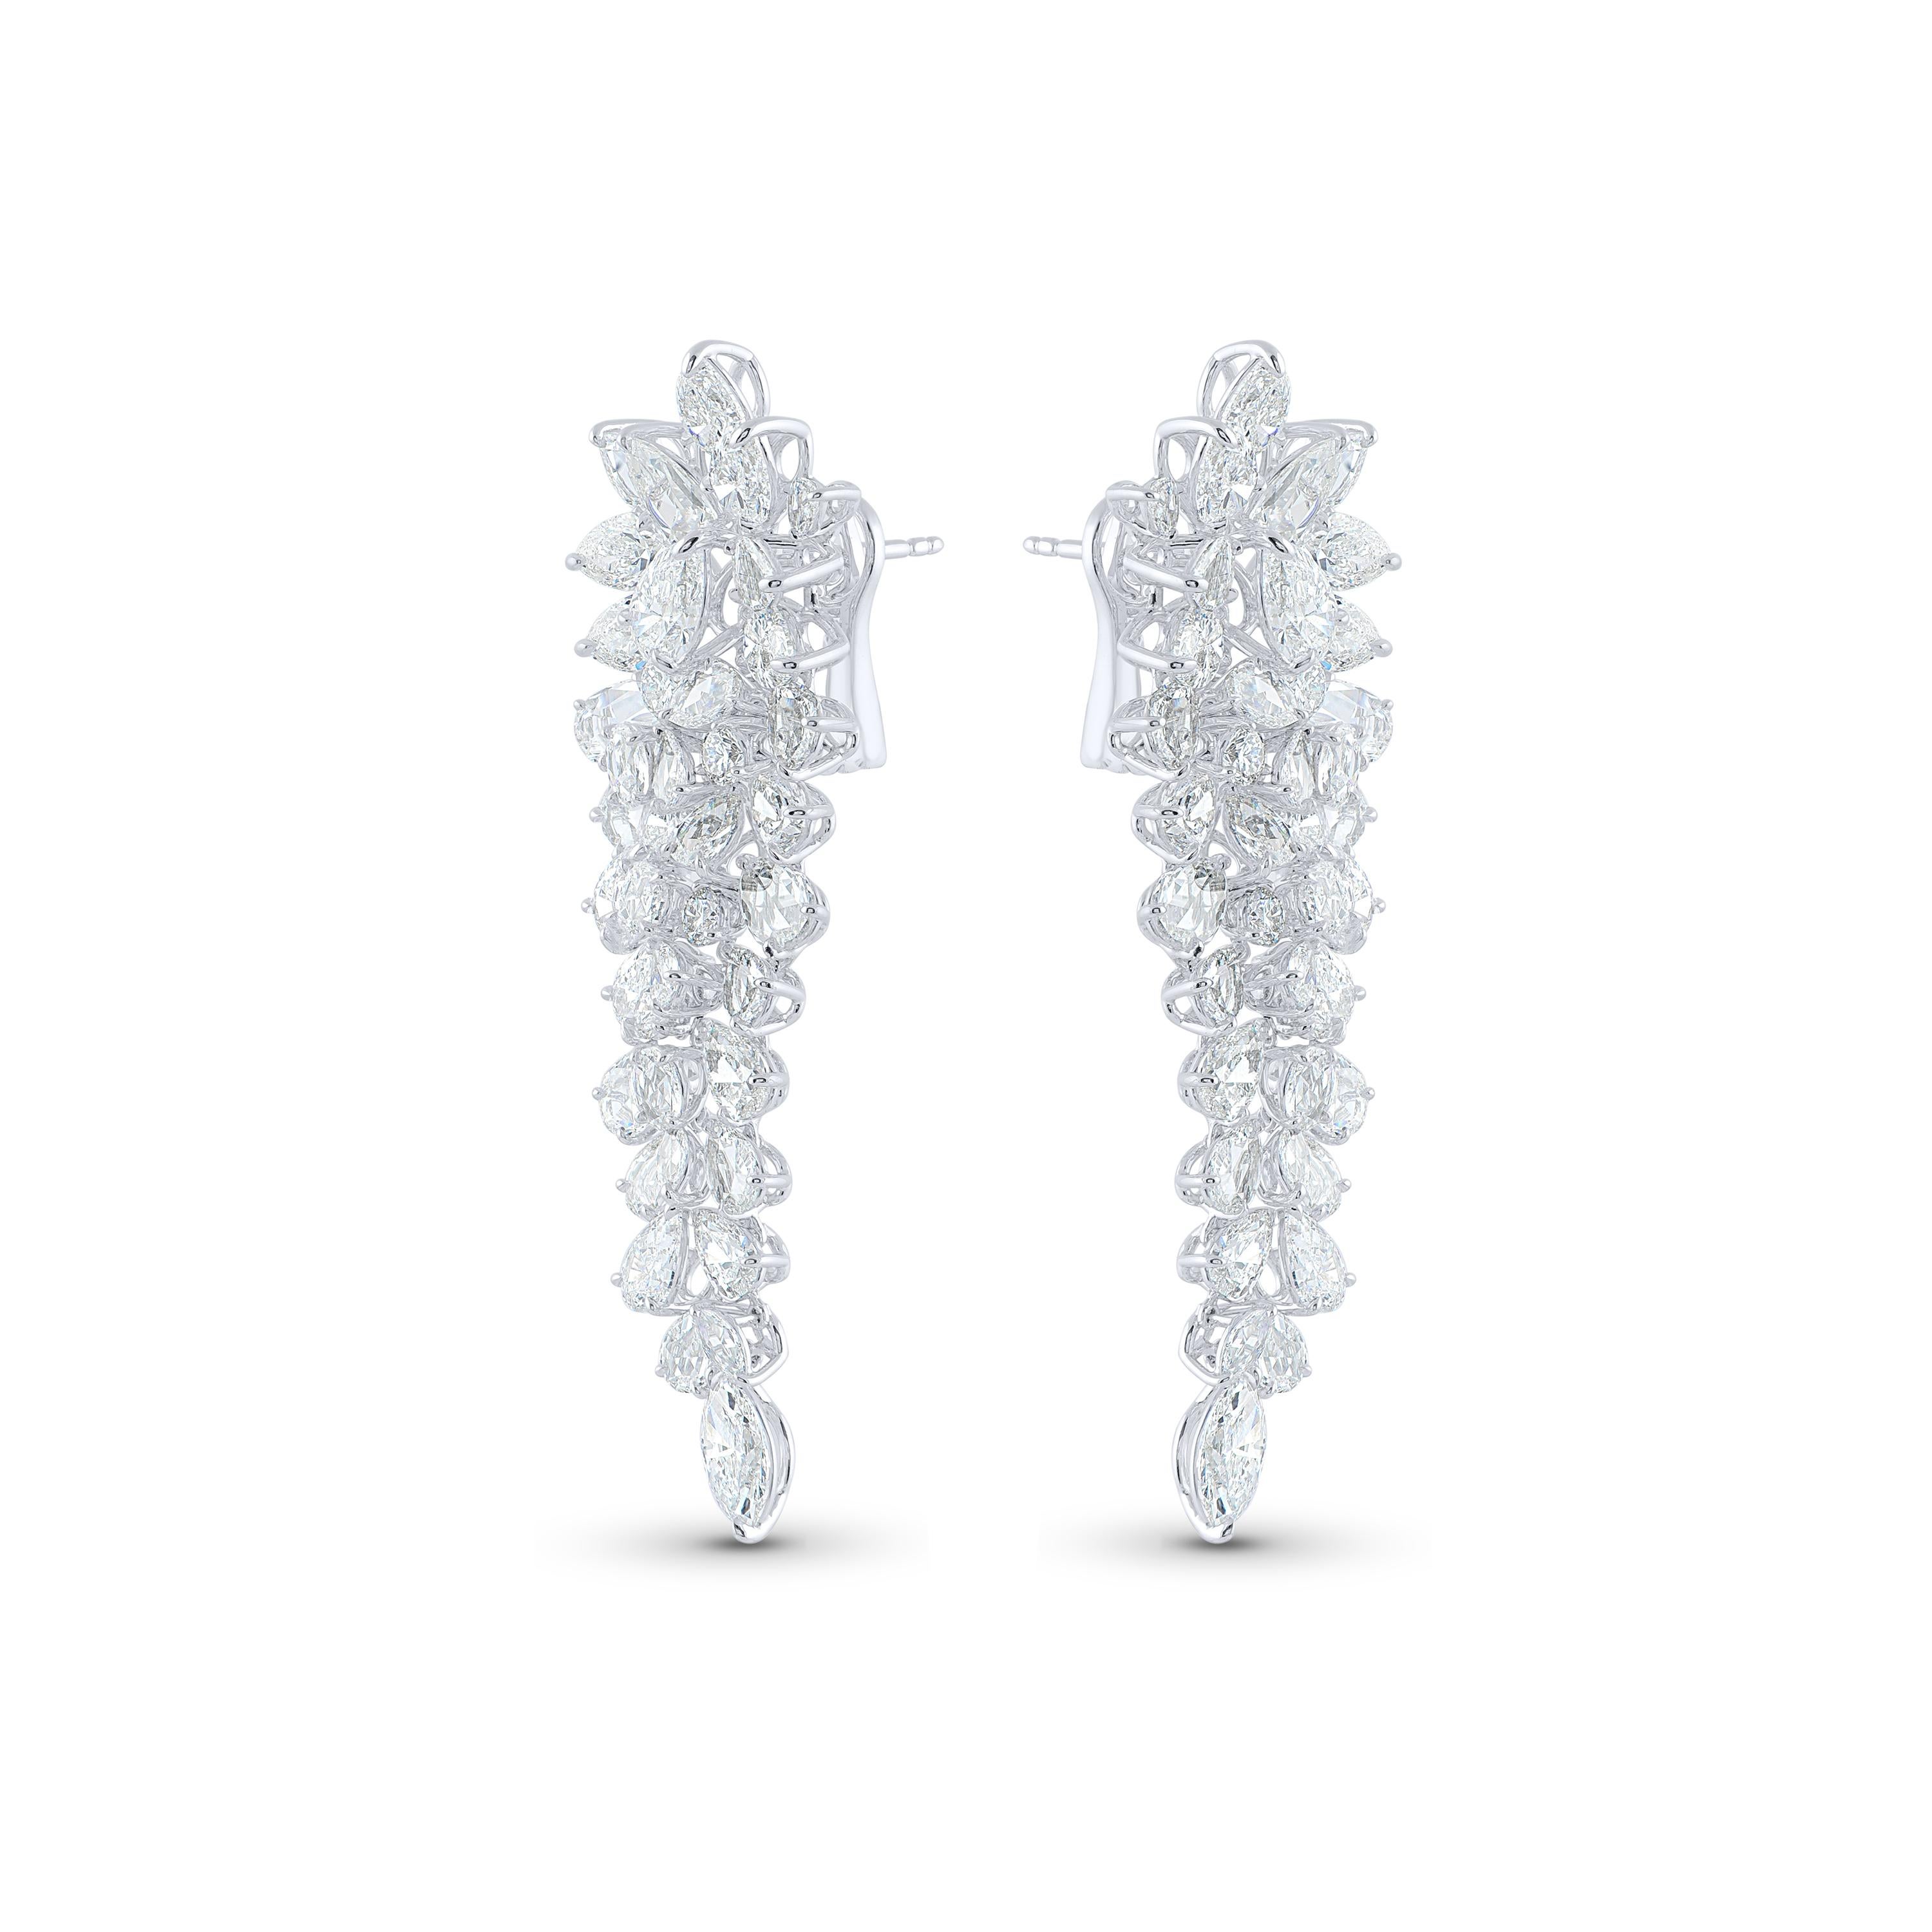 These 18 ct dangling clusters of brilliant-cut round, pear- and marquise-shaped diamonds, interspersed with Harakh’s signature rose-cut round and pear-shaped stones. Crafted in 18 KT white gold (Paladium alloyed). 

These earrings are studded with a